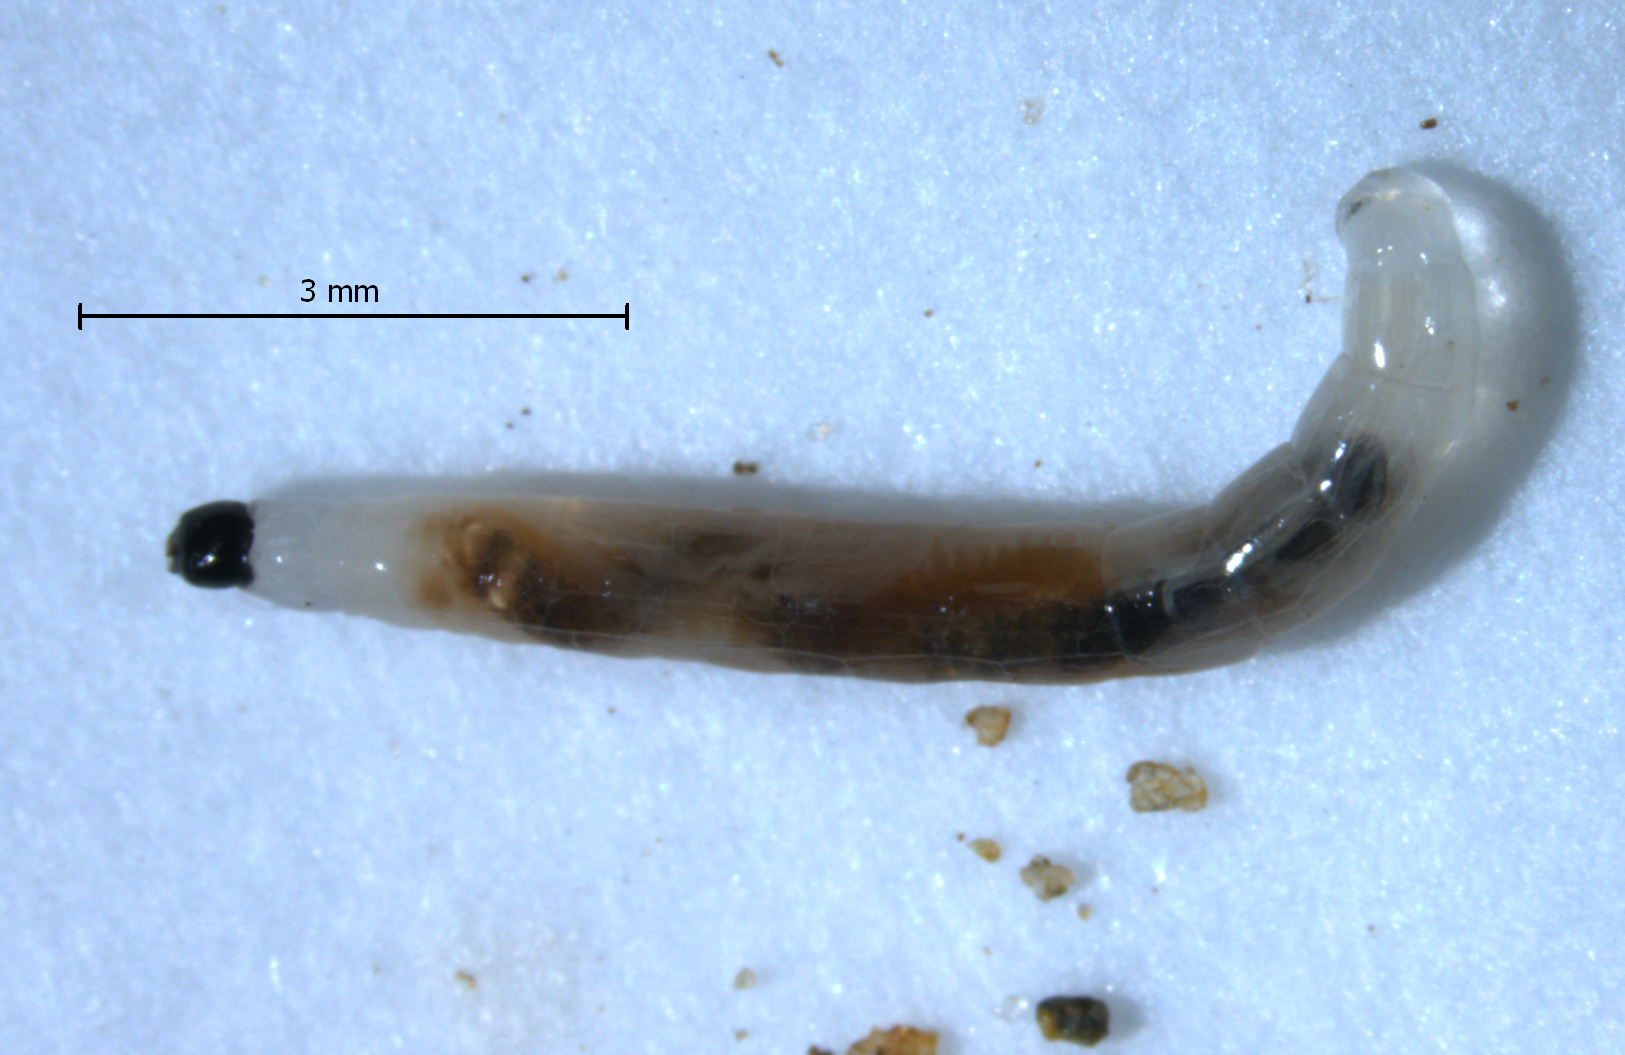 A segmented, worm-like fly larva sits on a white background. The exterior of the larva is translucent, revealing darker internal organs. The head is black. A 3 millimeter mark on the photograph indicates the larva is about 8 mm long.